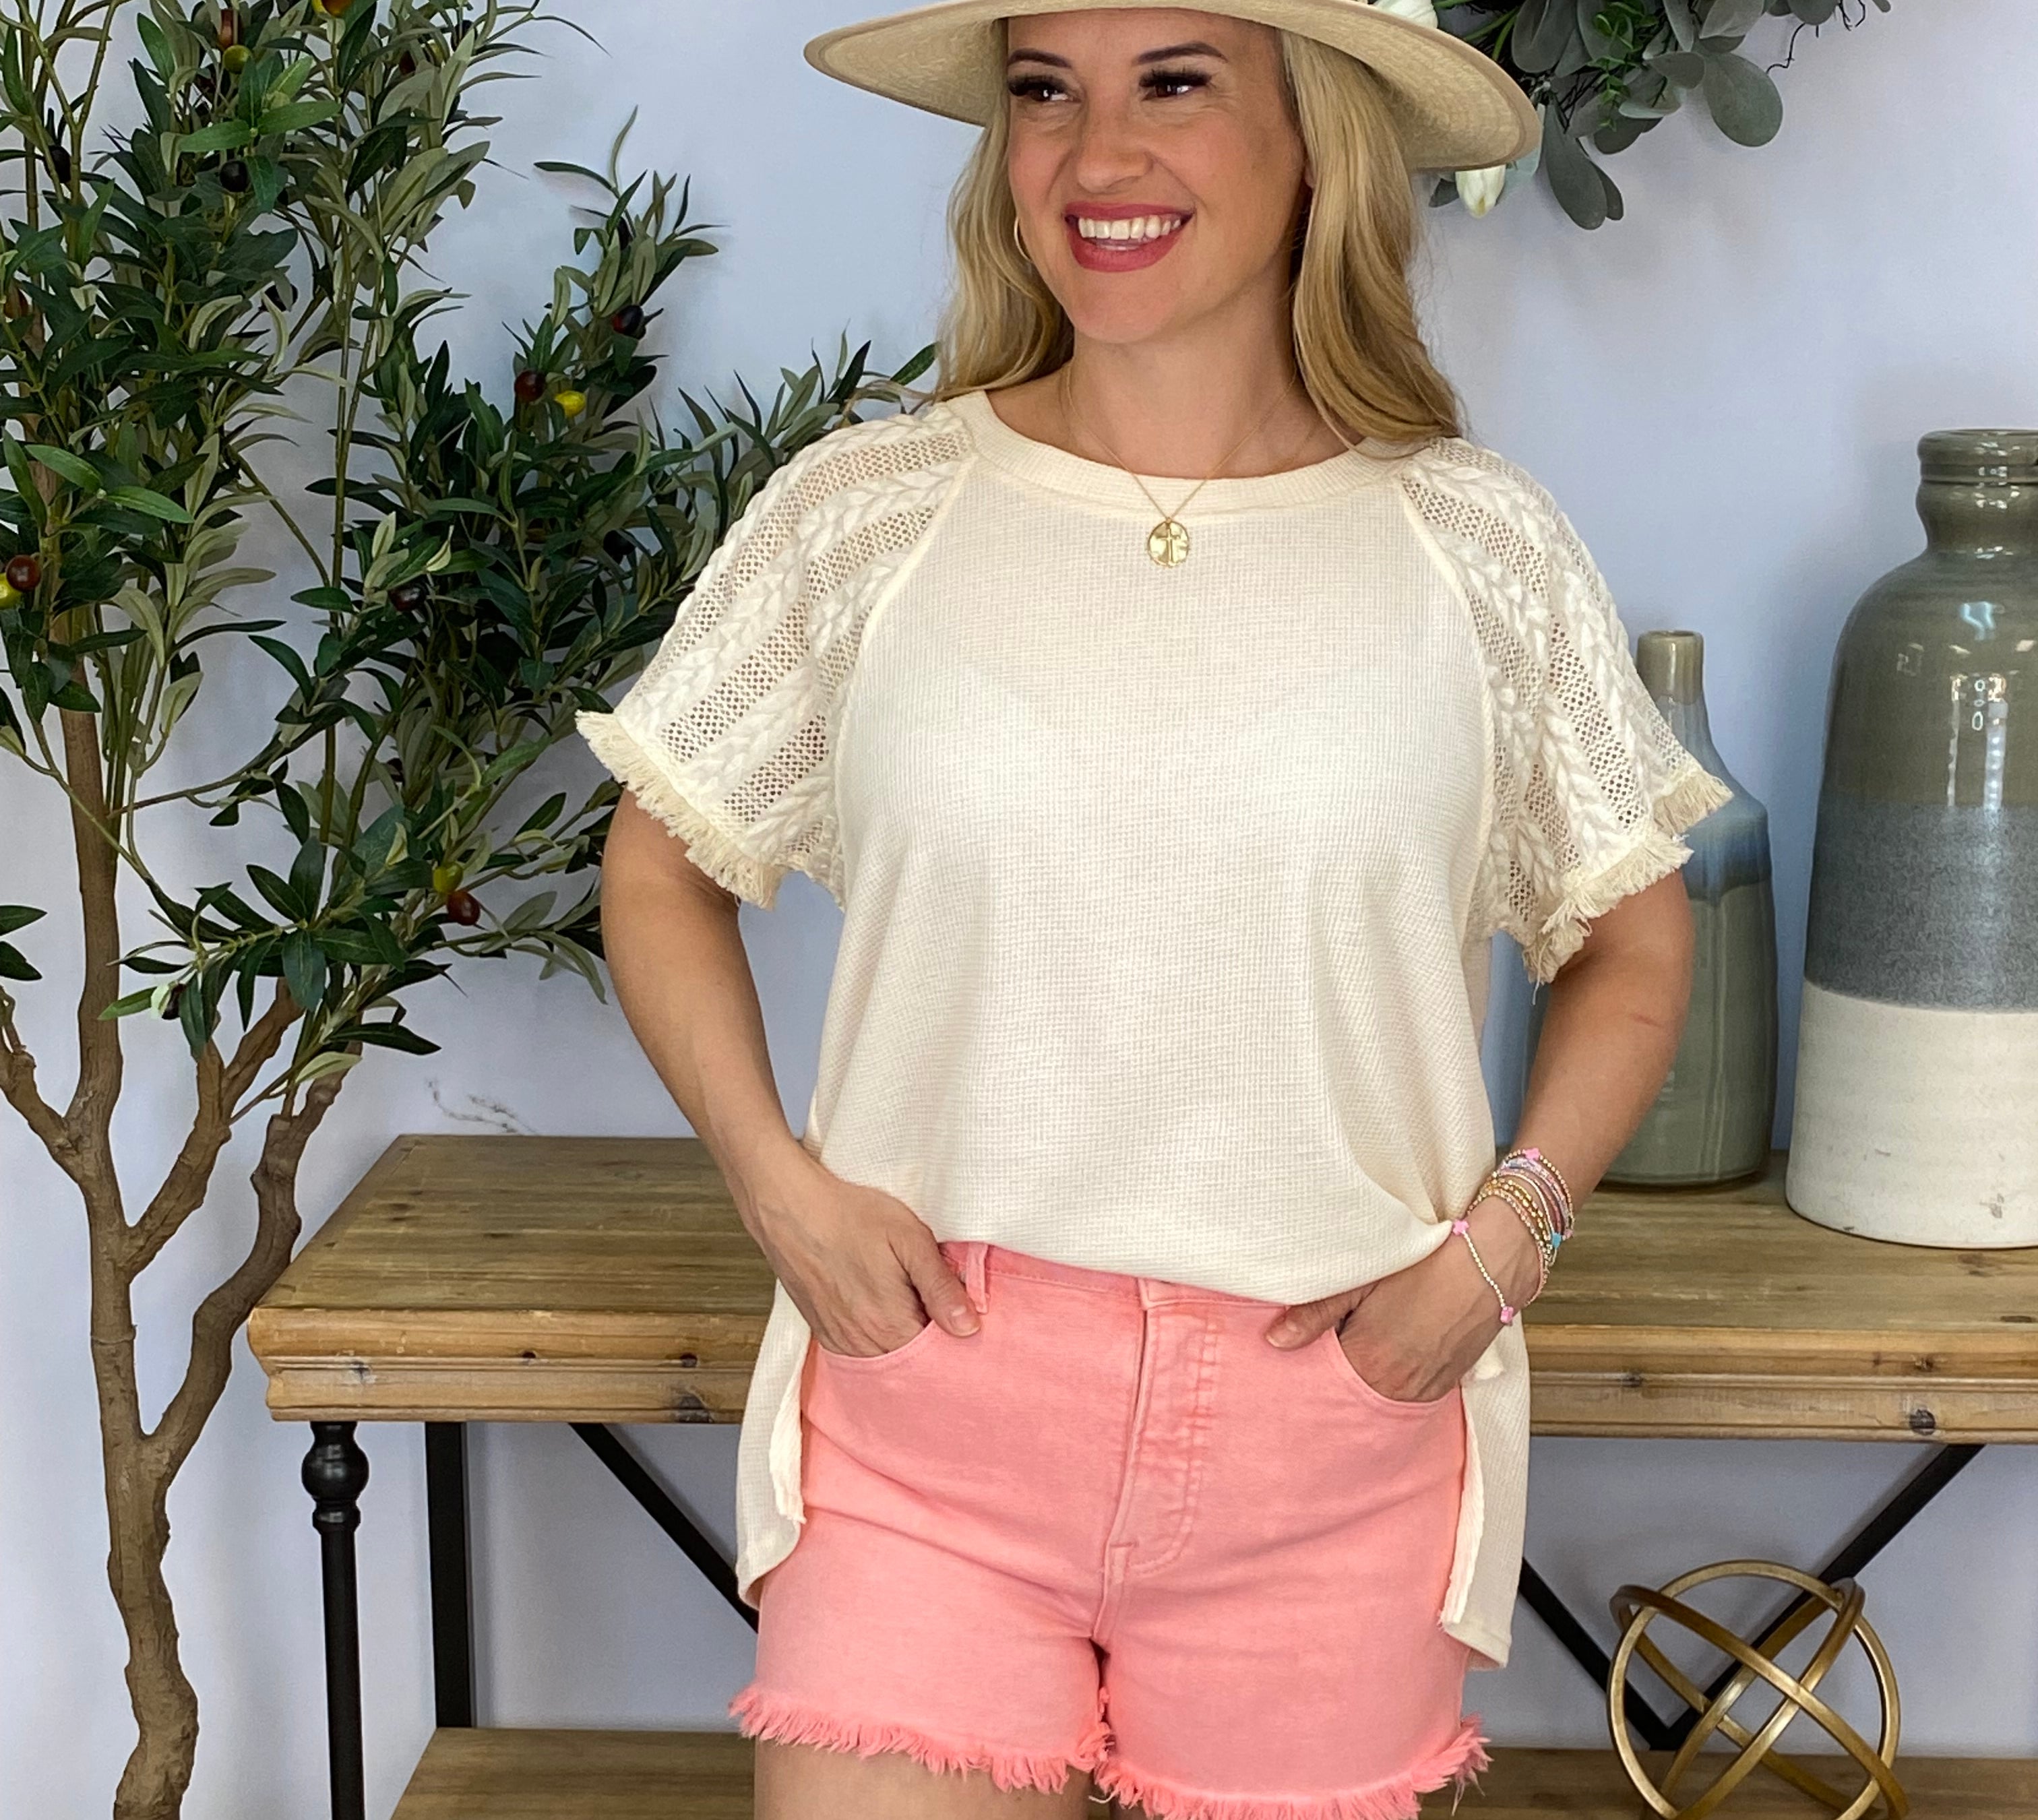 Pink Sunset Risen Shorts-230 Skirts/Shorts-Risen-The Lovely Closet, Women's Fashion Boutique in Alexandria, KY